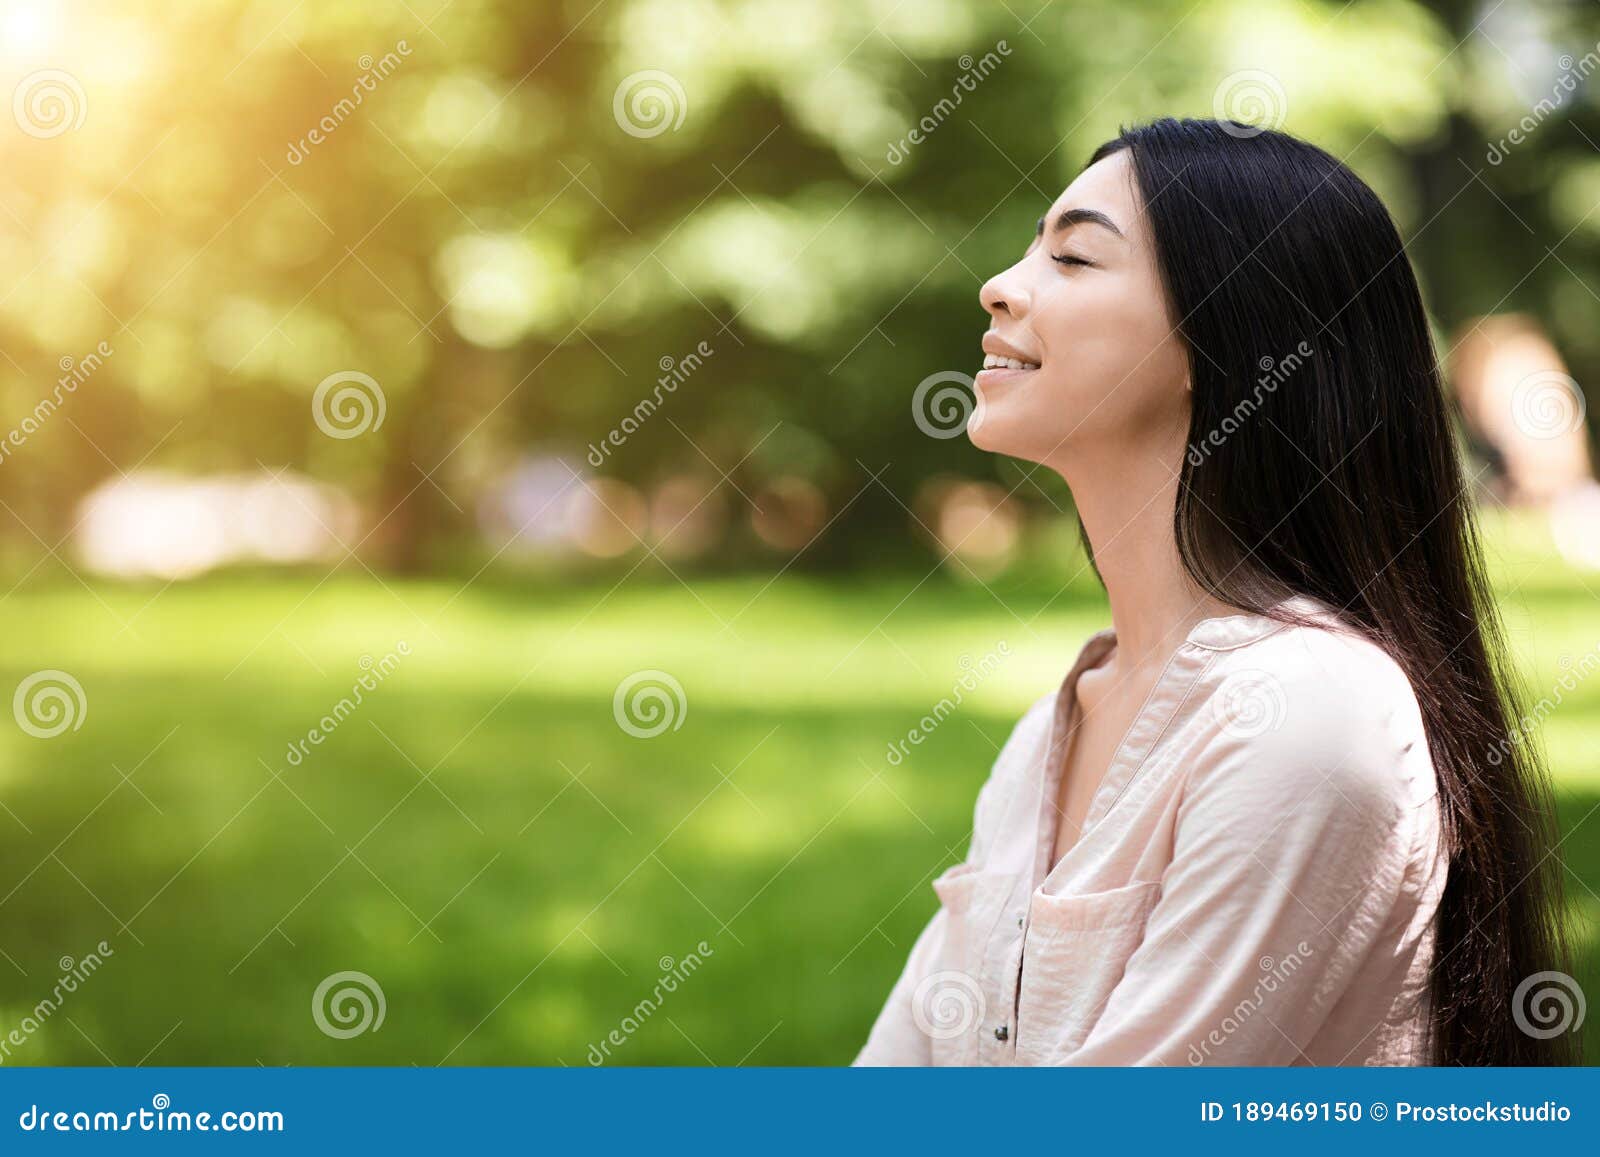 portrait of relaxed asian girl breathing deeply with closed eyes in park